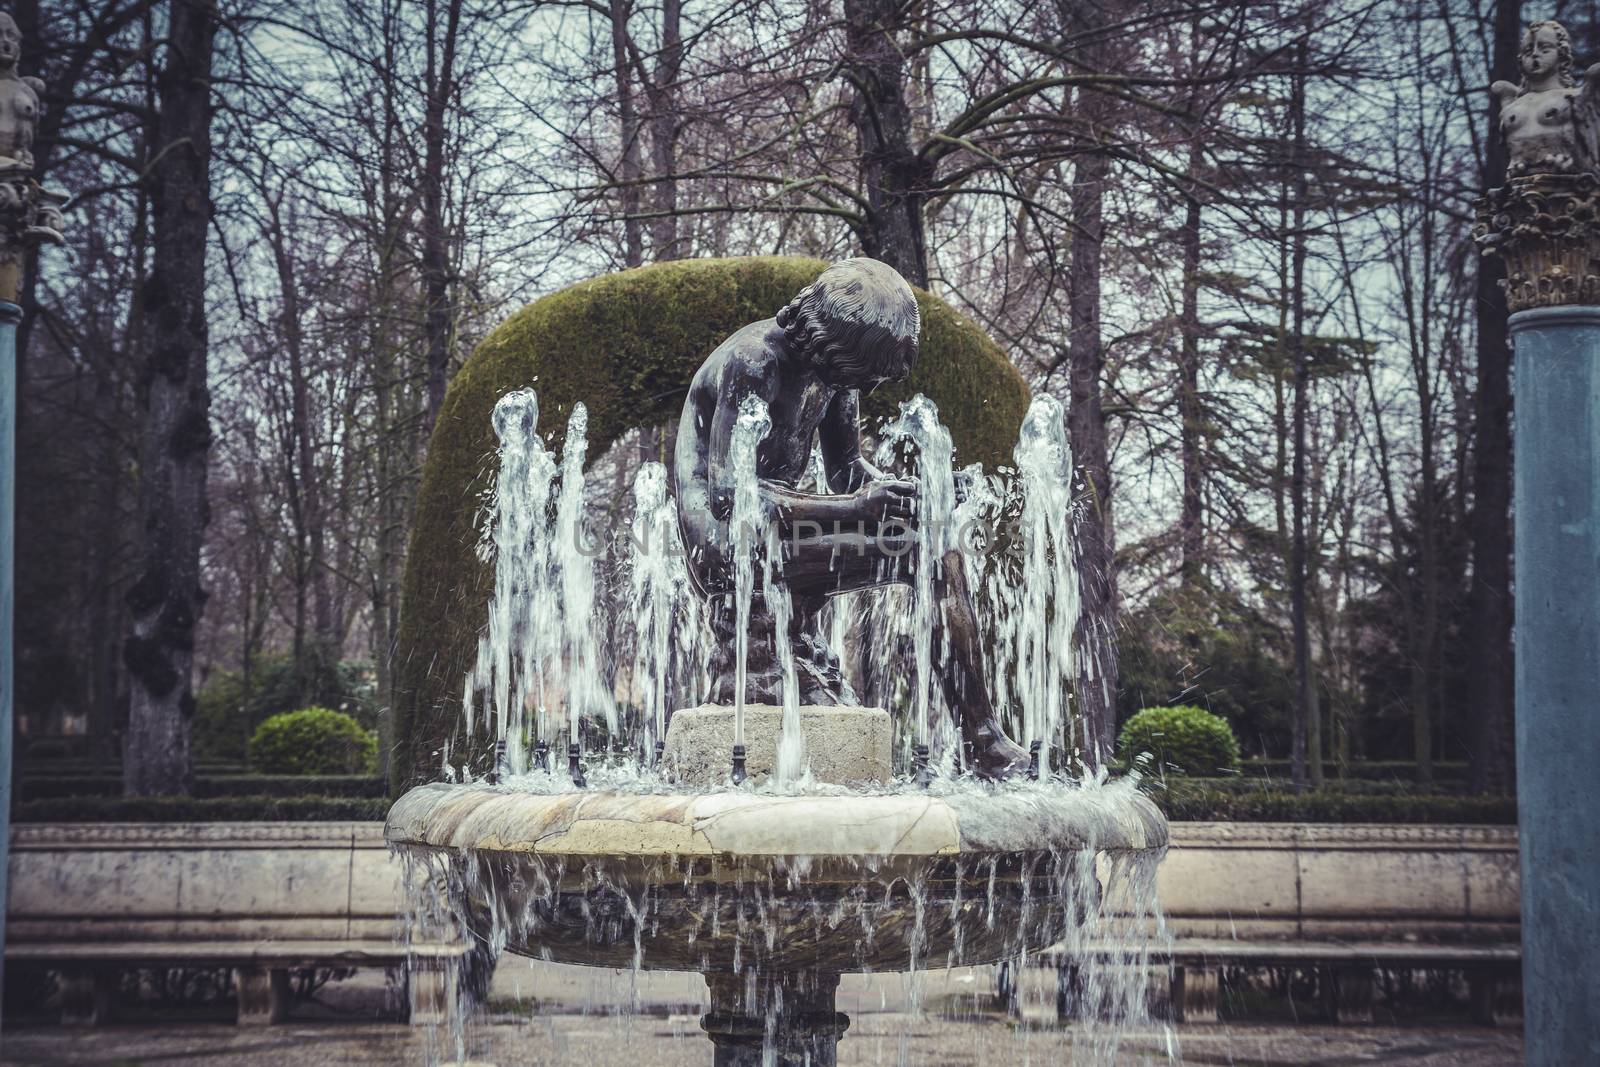 Ornamental fountains of the Palace of Aranjuez, Madrid, Spain.Wo by FernandoCortes